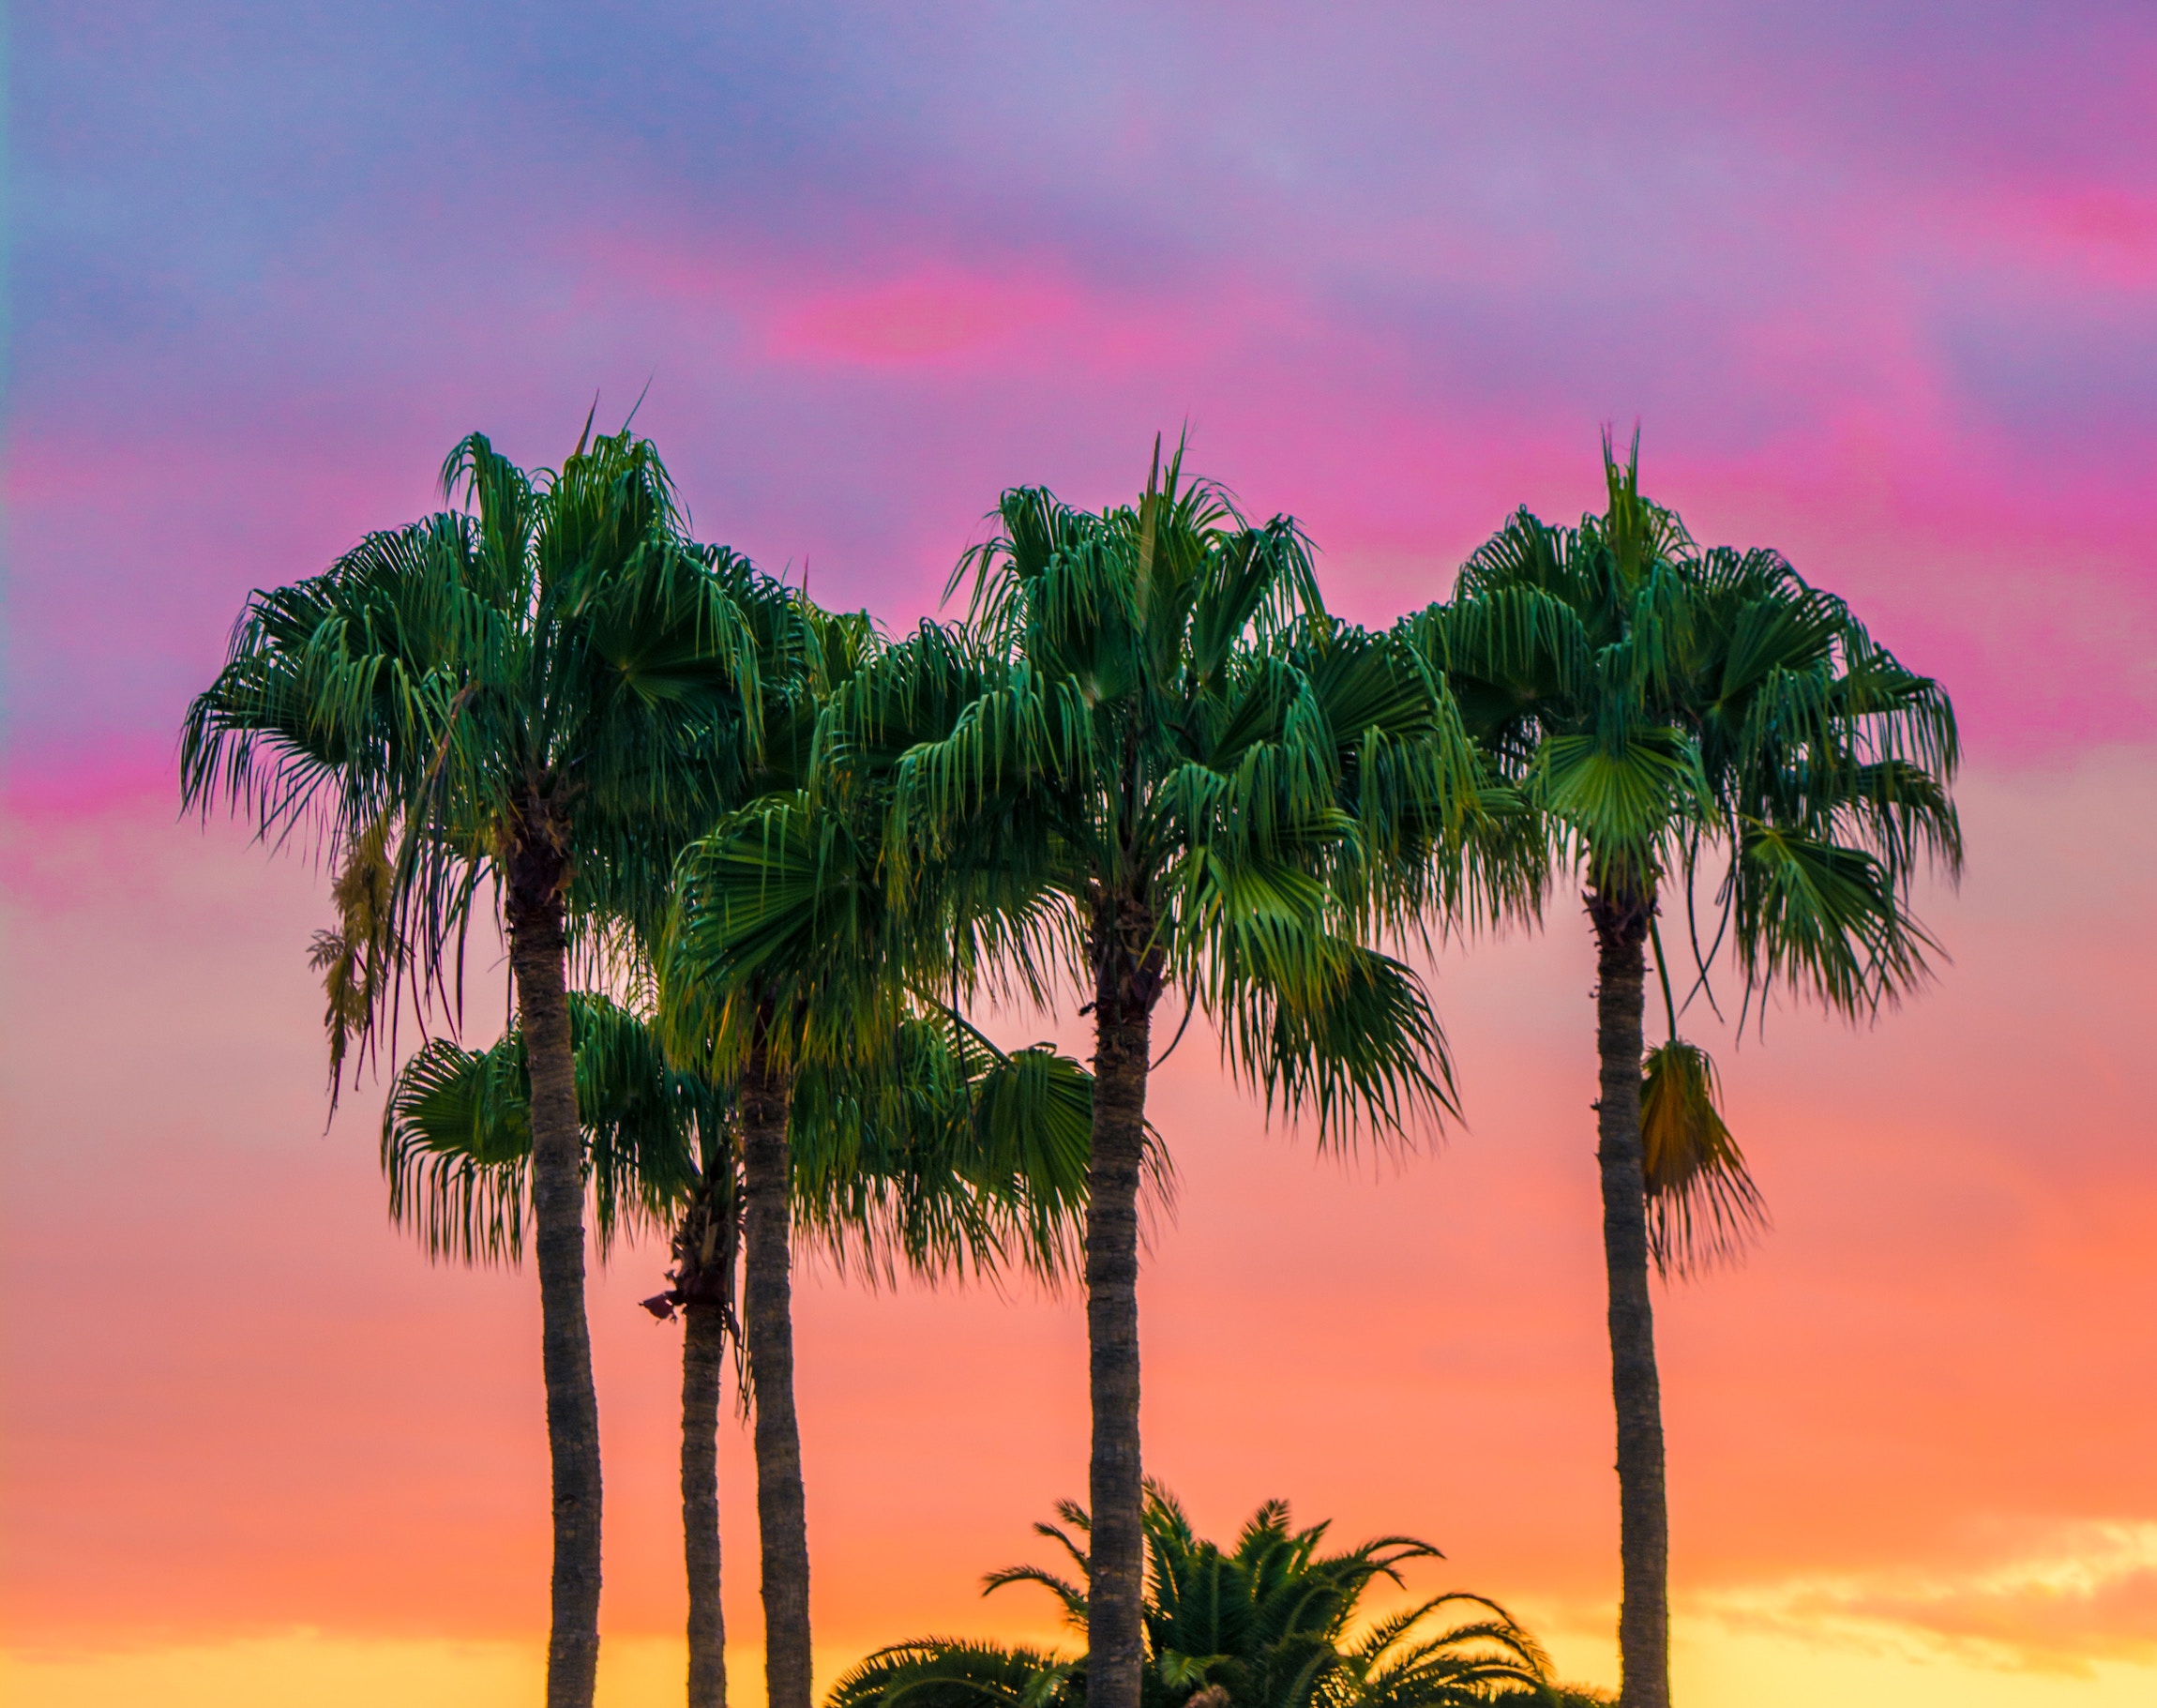 Palm trees against a sunset